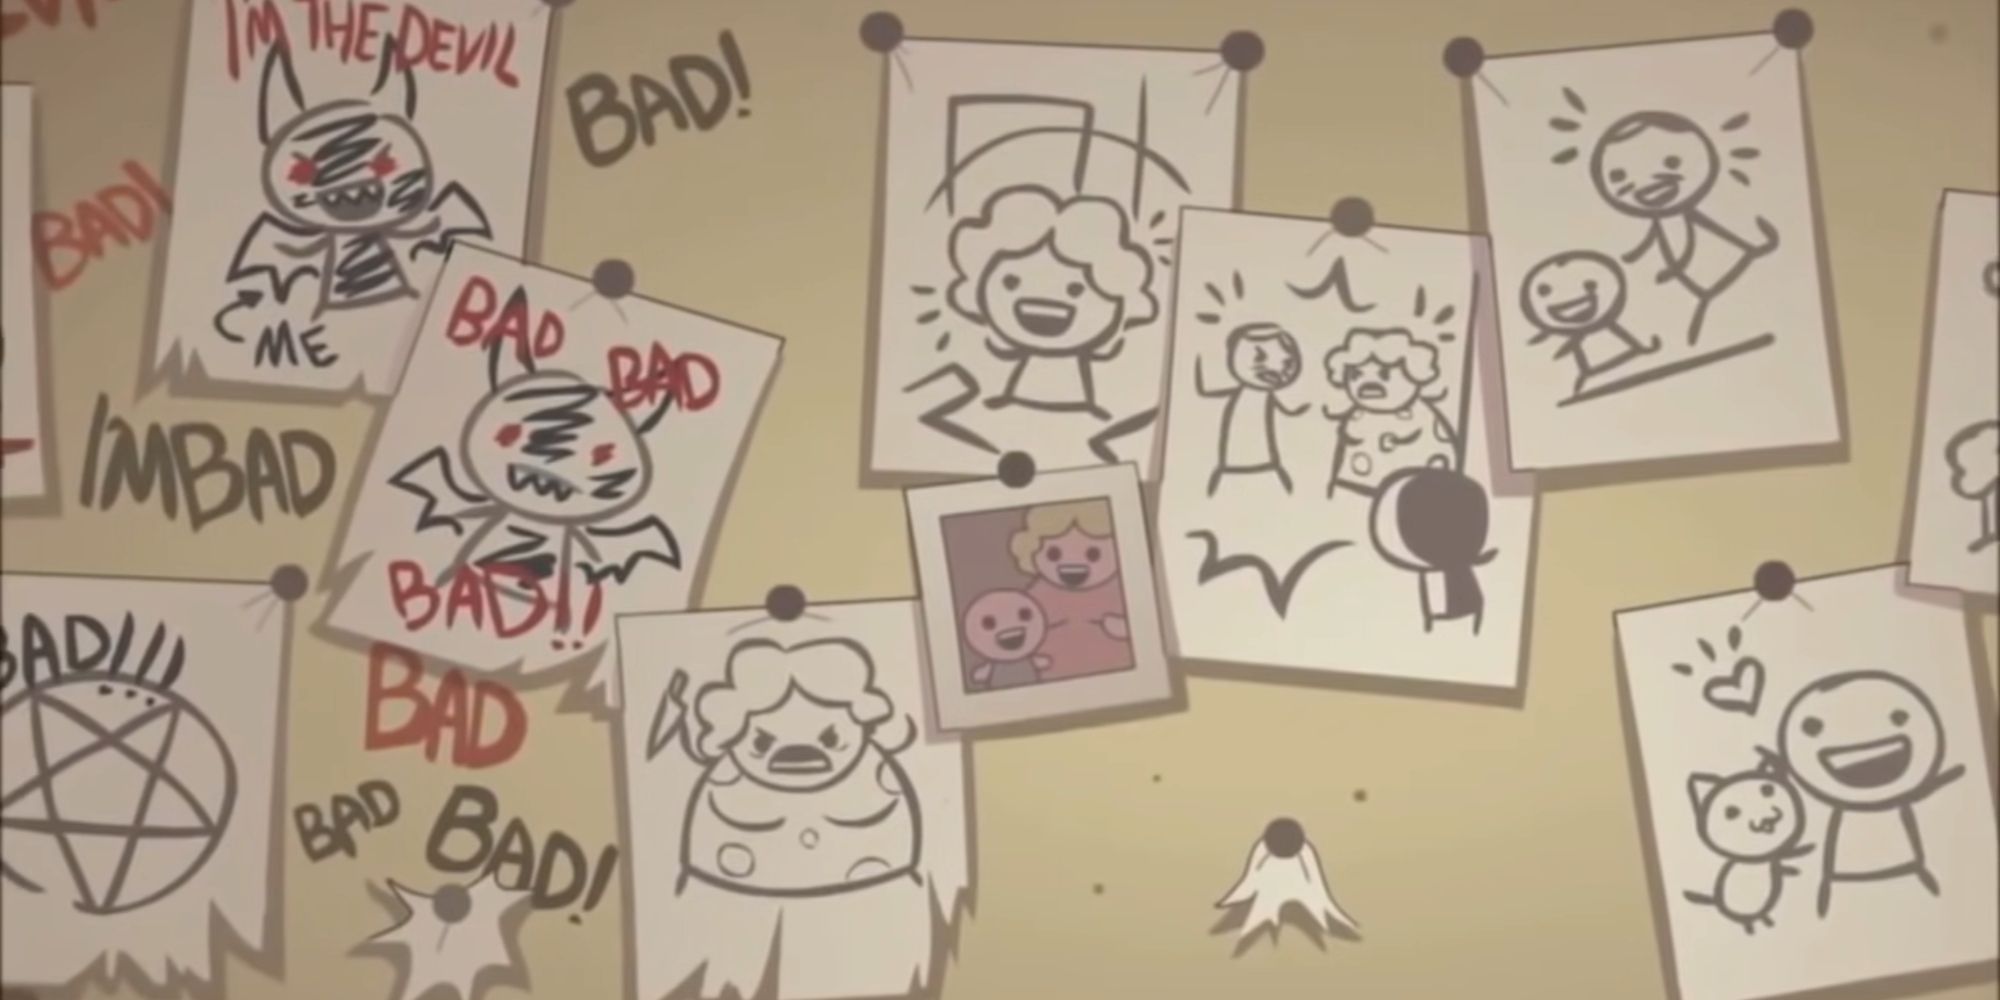 The Binding of Isaac Ending - Wall filled with drawings and scribbles